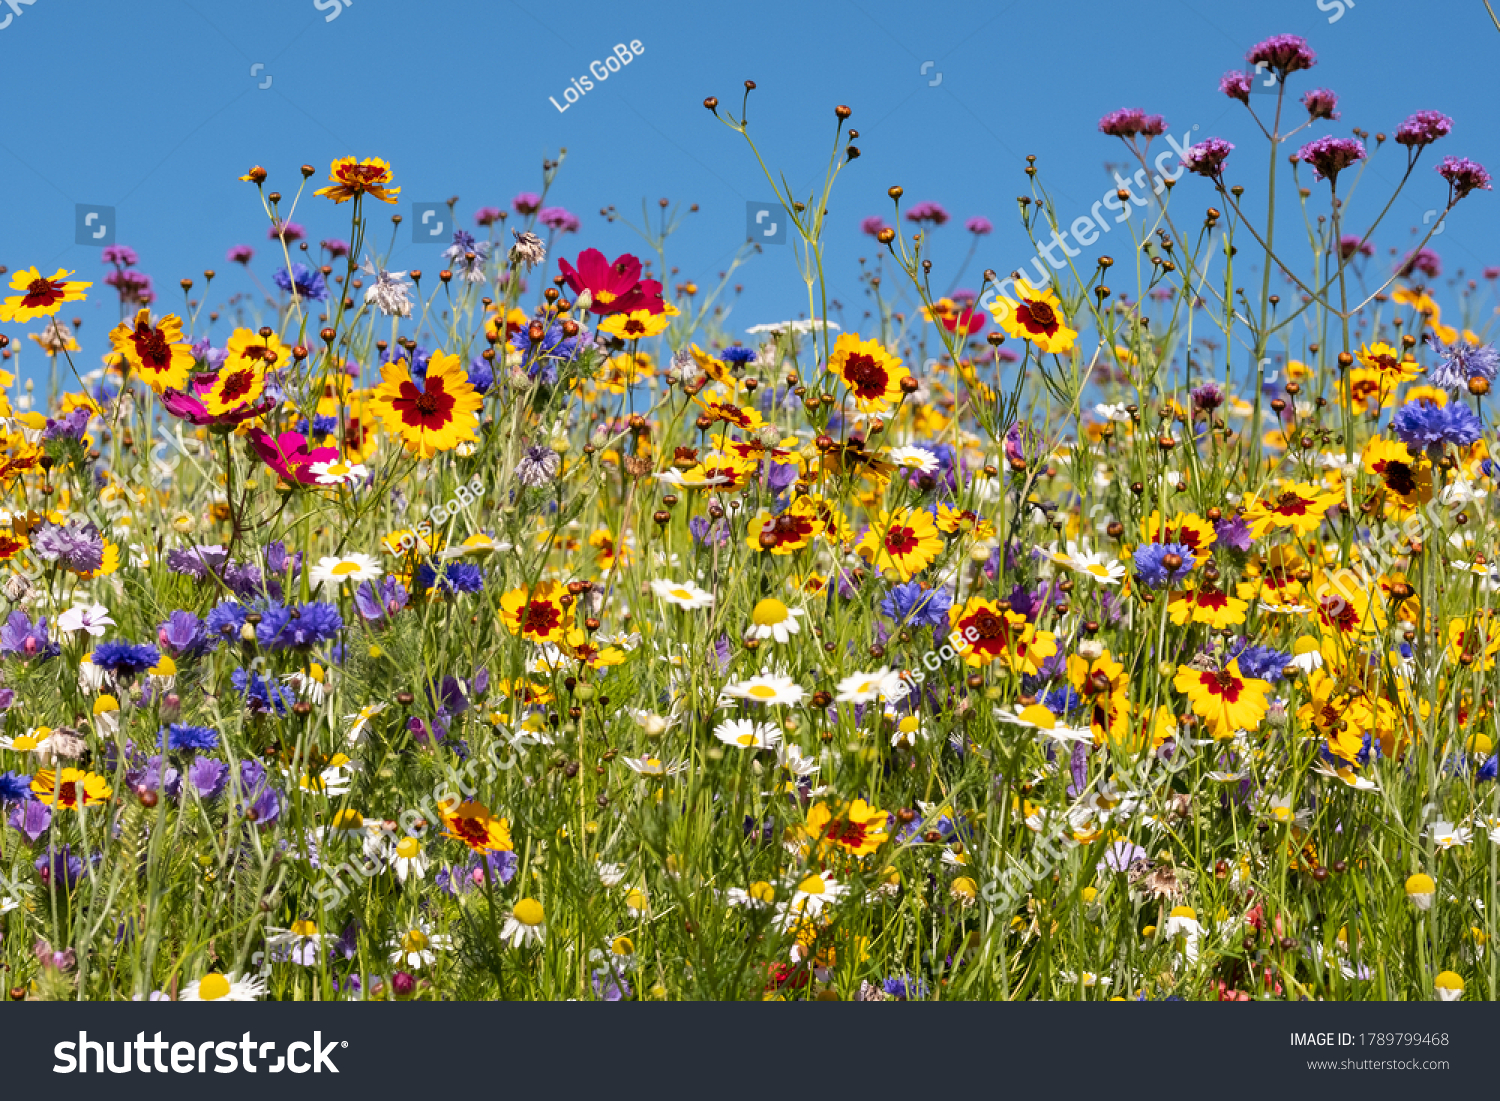 Colourful wild flowers blooming outside Savill Garden, Egham, Surrey, UK, photographed against a clear blue sky. #1789799468